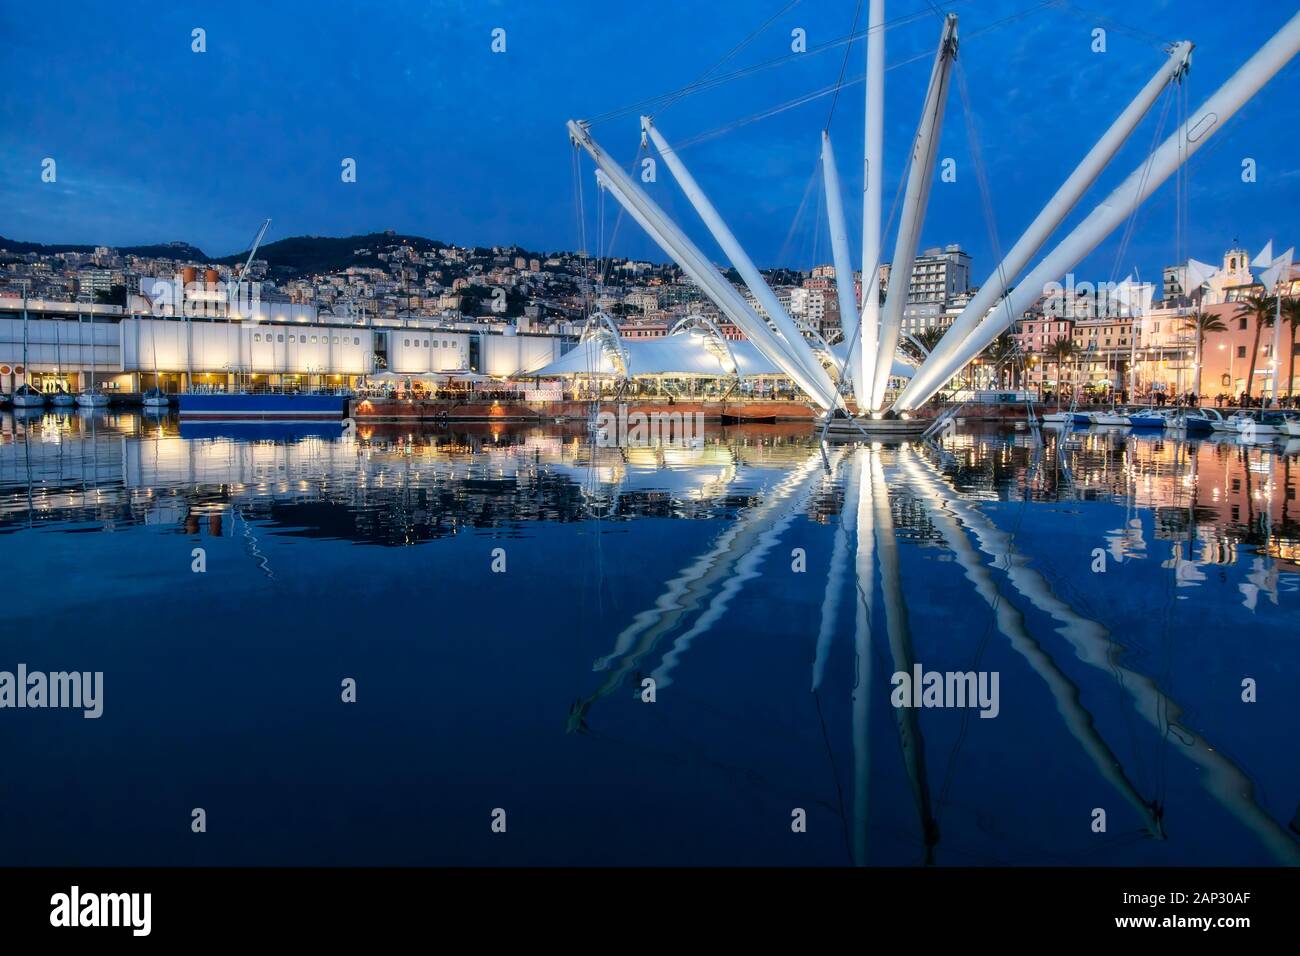 Evening view of the Bigo structure in the old port of Genoa, Italy, with the reflection of the arms of the building in calm water surface Stock Photo